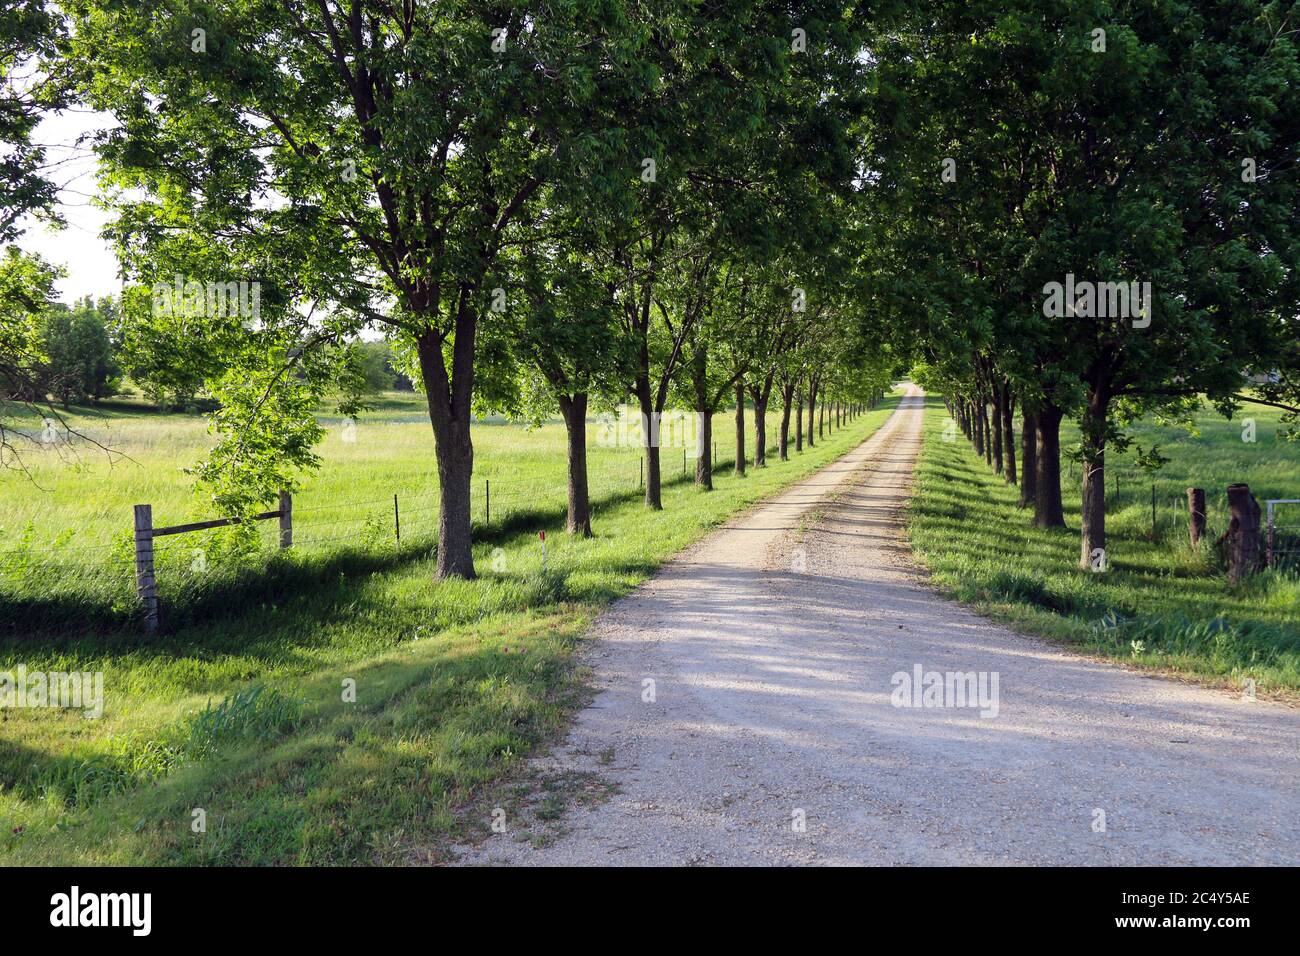 A Beautiful Tree Lined Dirt Driveway Leading Through A Lush Meadow Stock Photo Alamy